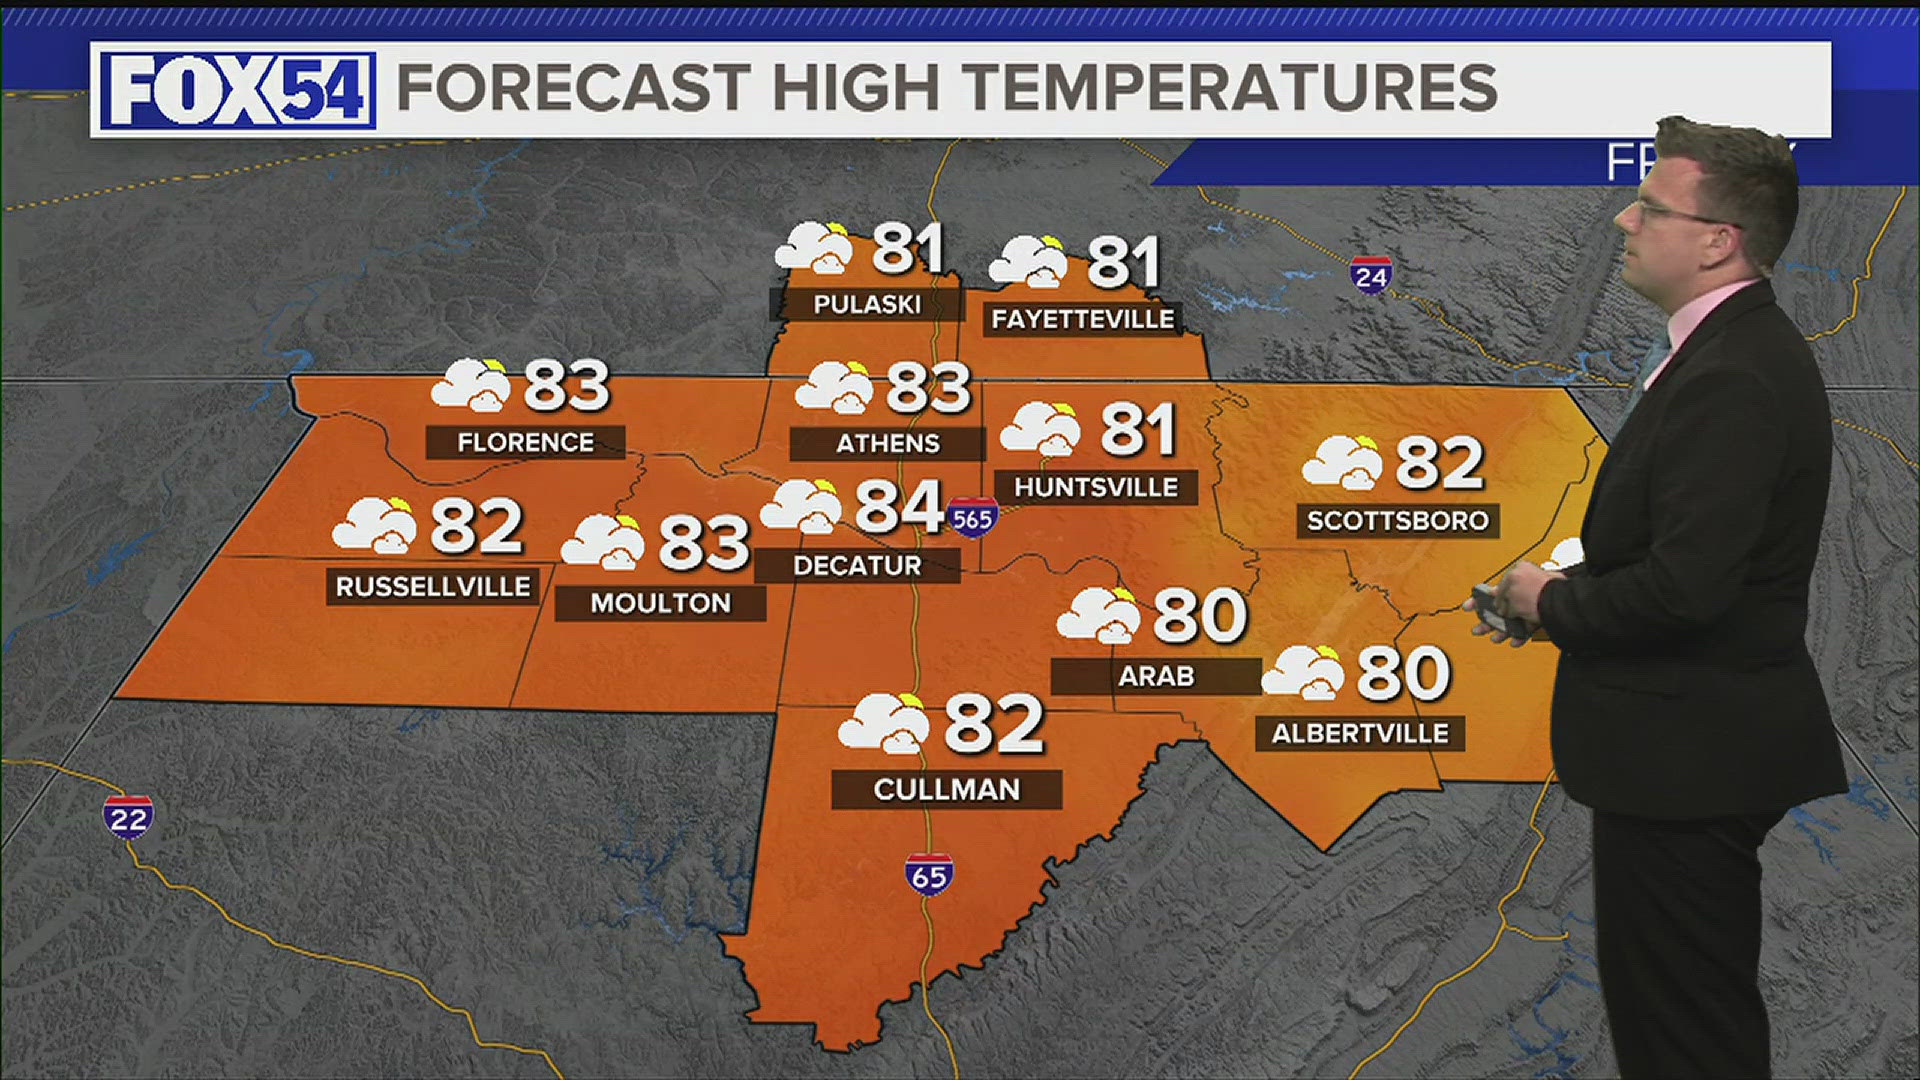 Isolated showers will be in the forecast on Thursday, but we're still going to be quite warm across the Tennessee Valley even as we approach the weekend.